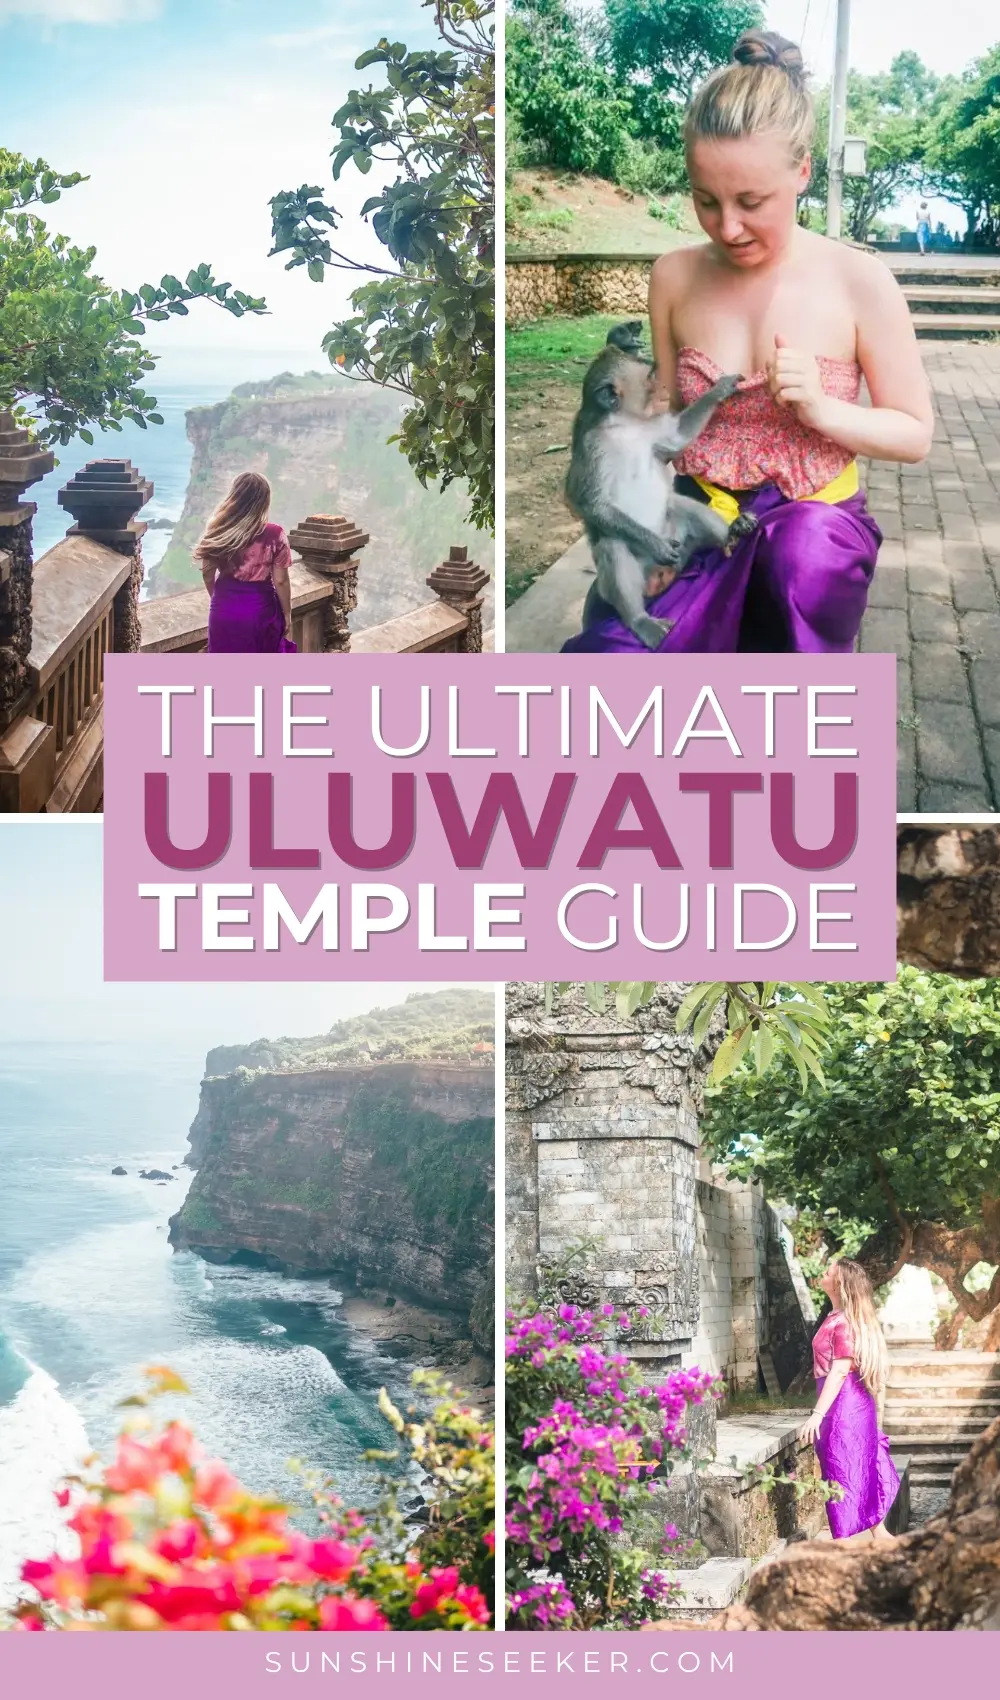 Click through for a complete guide to Uluwatu Temple in Bali. See why it is one of my favorite temples on the island and how to stay safe around the monkeys. Uluwatu Temple.